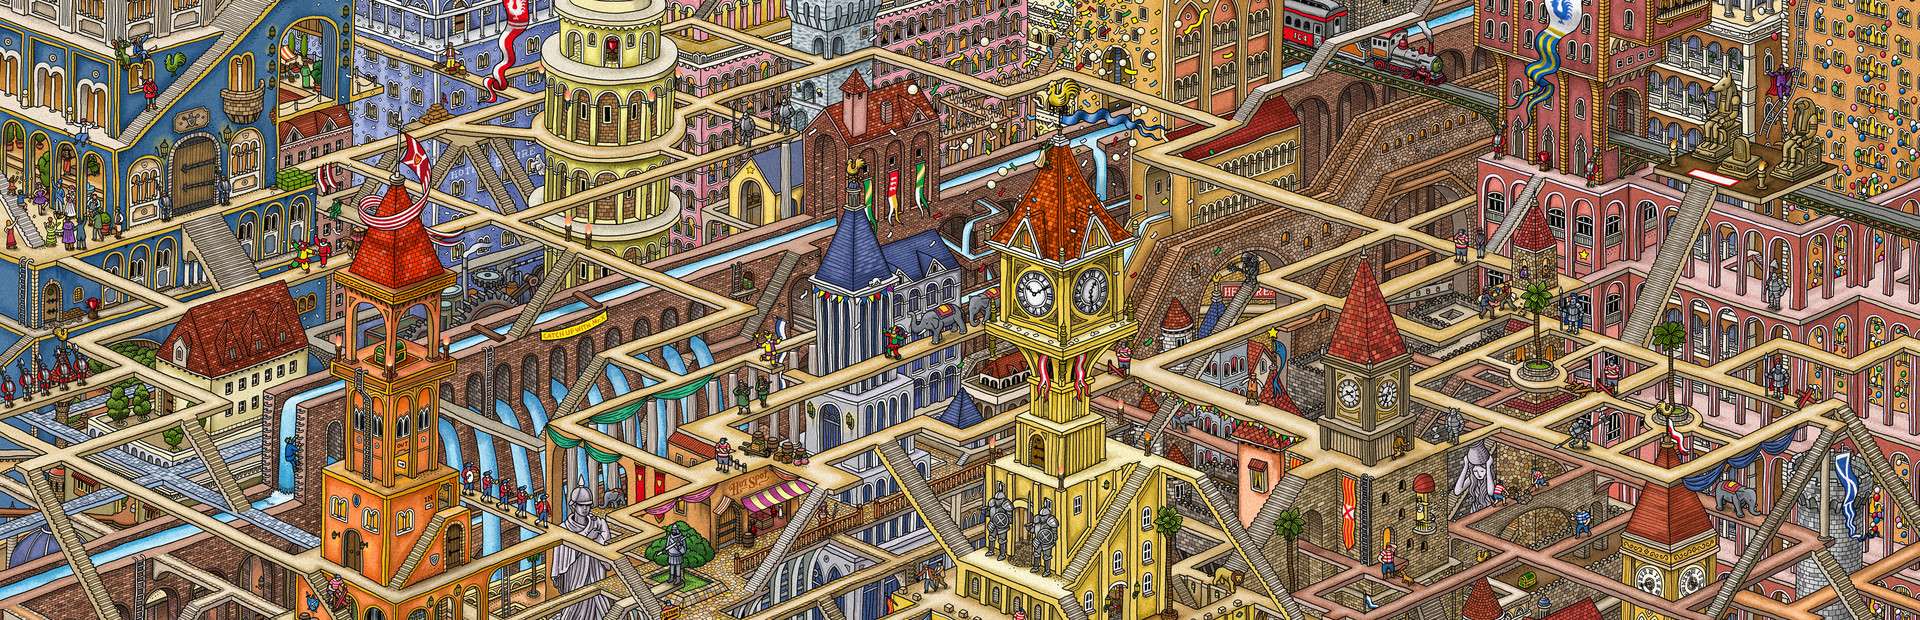 Labyrinth City: Pierre the Maze Detective cover image